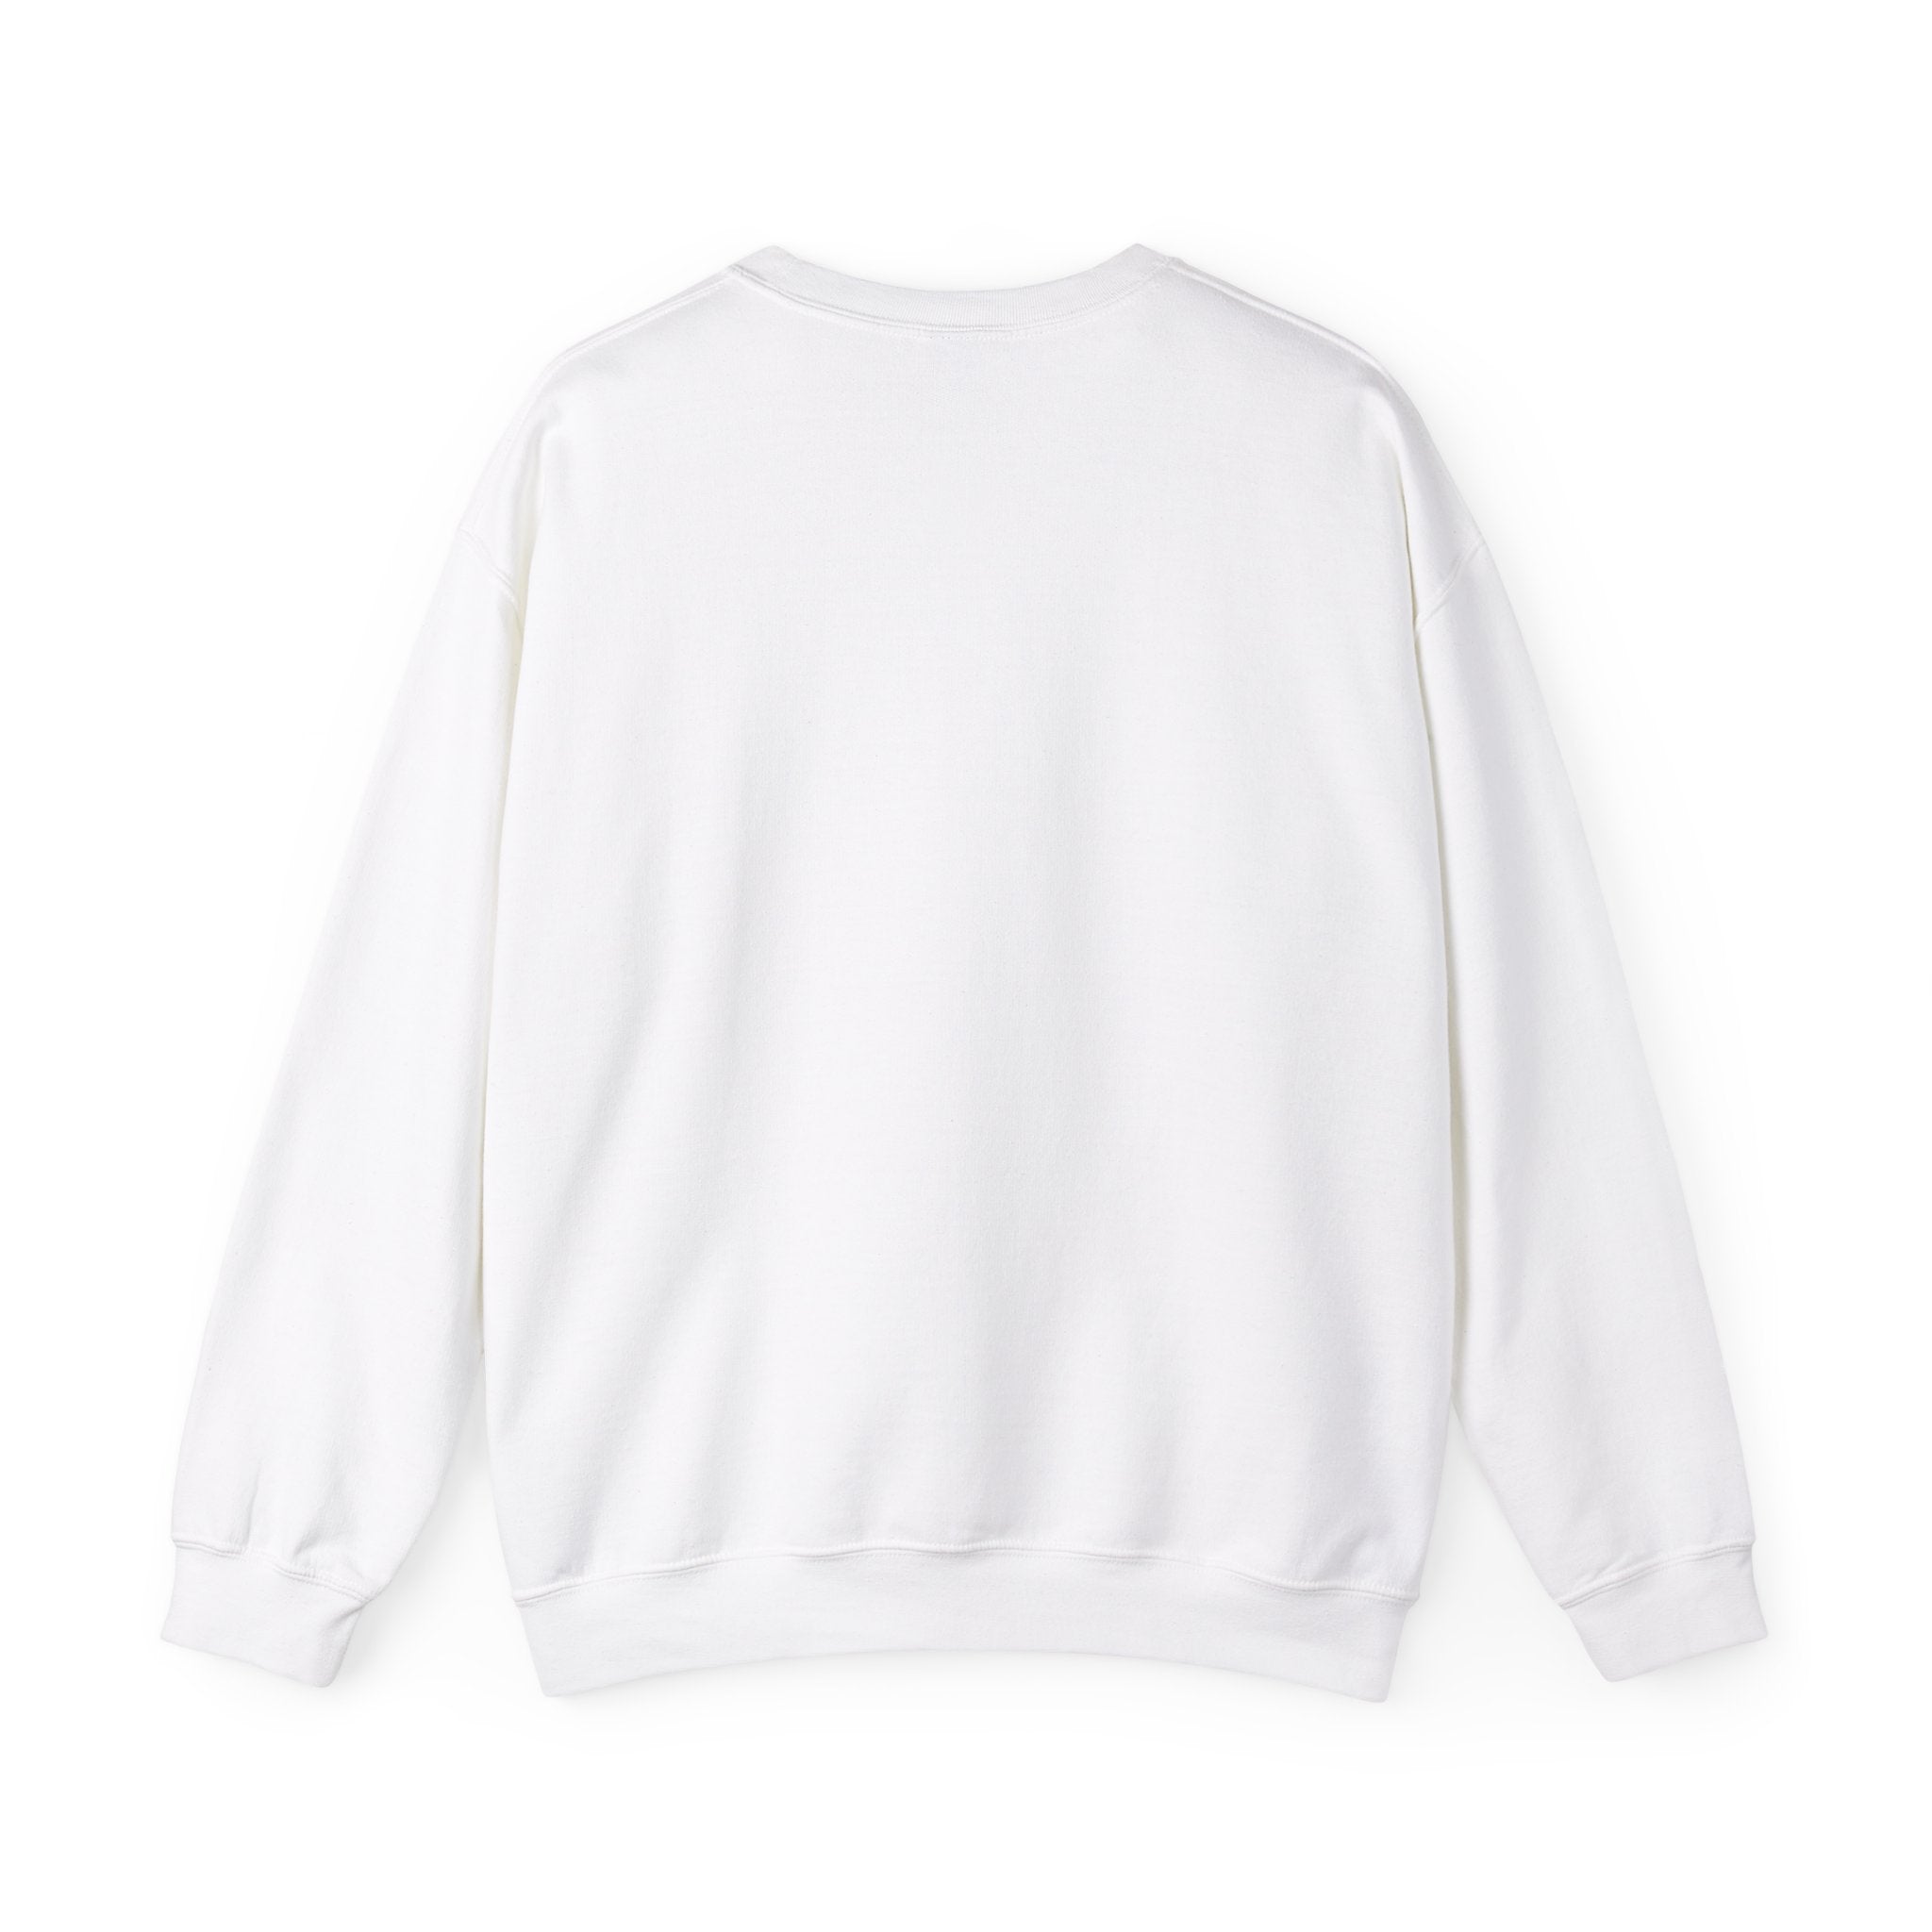 Back view of a stylish white sweatshirt with long sleeves and a round neckline, perfect for staying cozy. This RG-B - Sweatshirt combines simplicity with comfort.